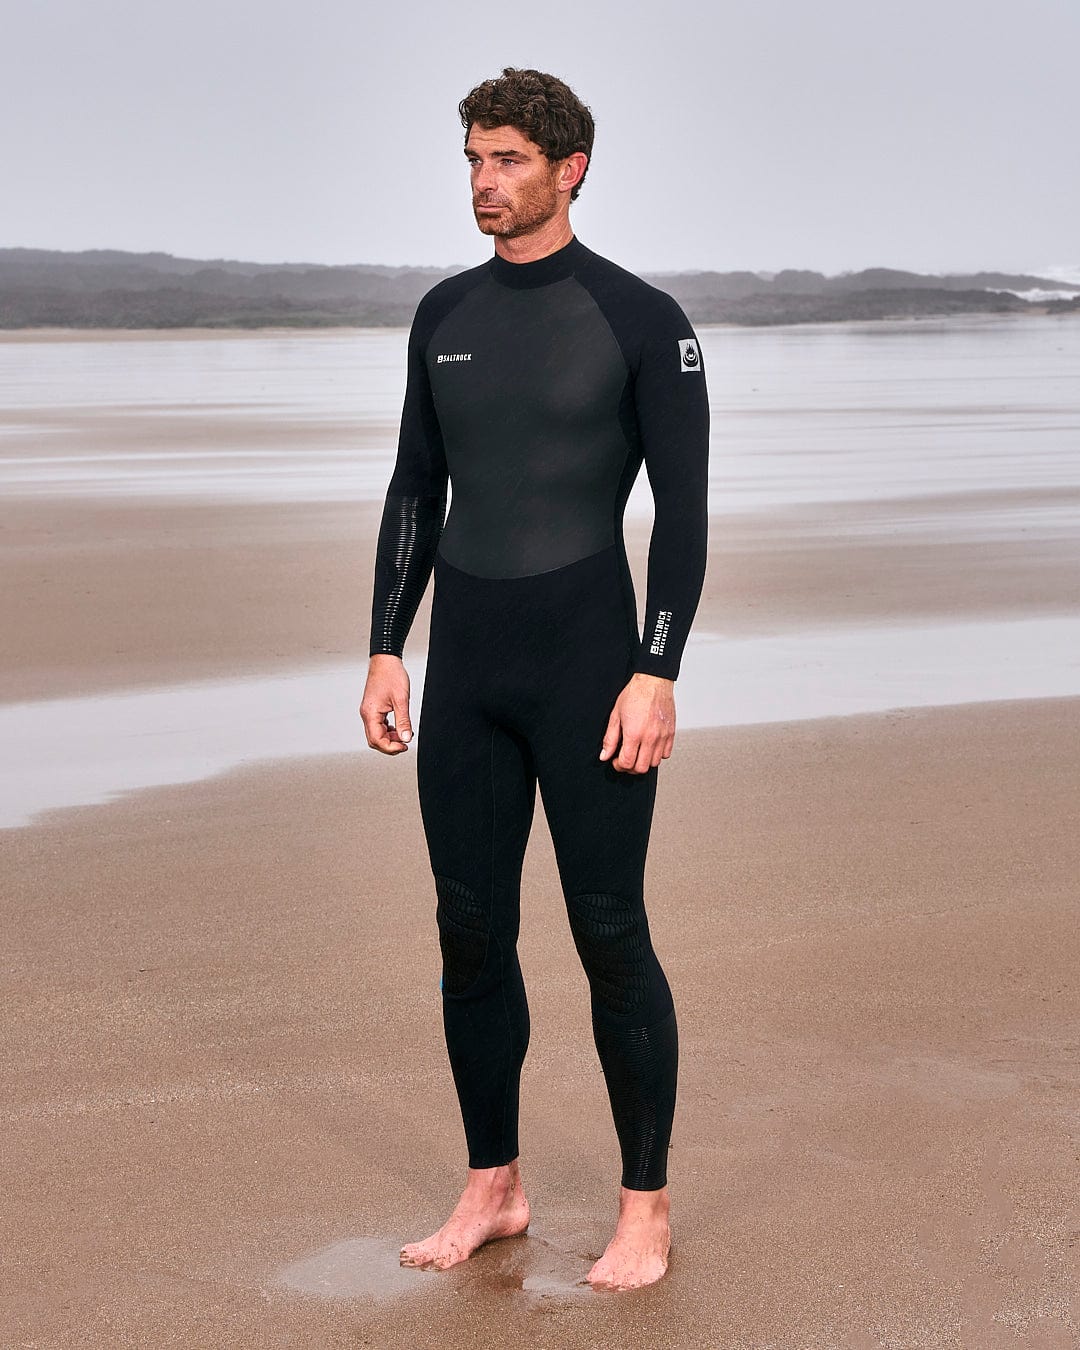 A man standing on the beach in a Saltrock Synthesis - Mens 4/3 Back Zip Full Wetsuit - Black.